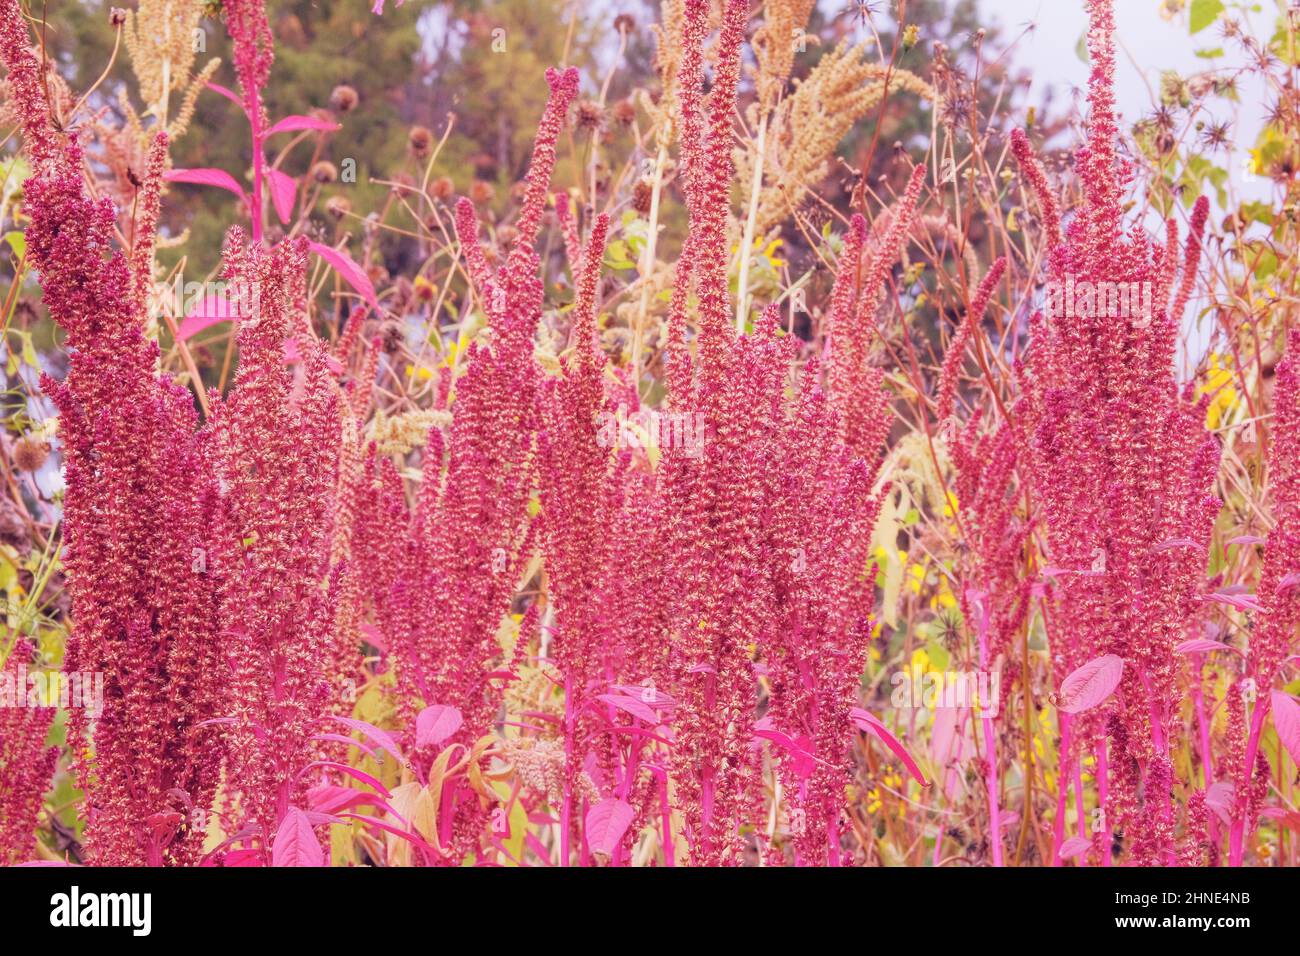 Amaranth is growing in rural garden. Organic red Amaranth in farming and harvesting. Growing vegetables at home. Stock Photo